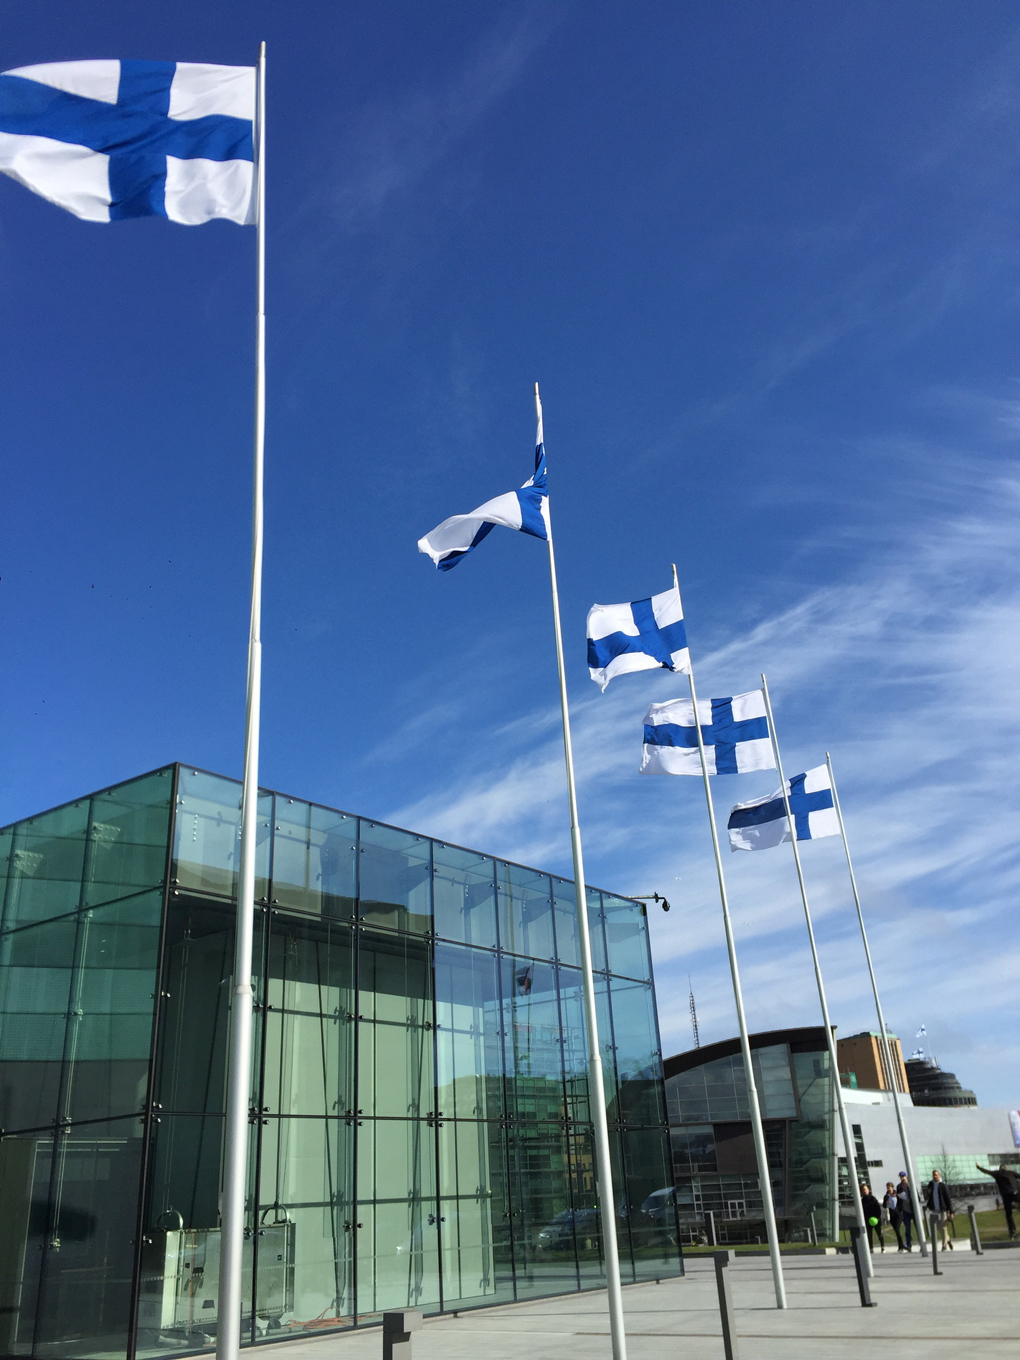 Finnish flags in a row outside a modern building